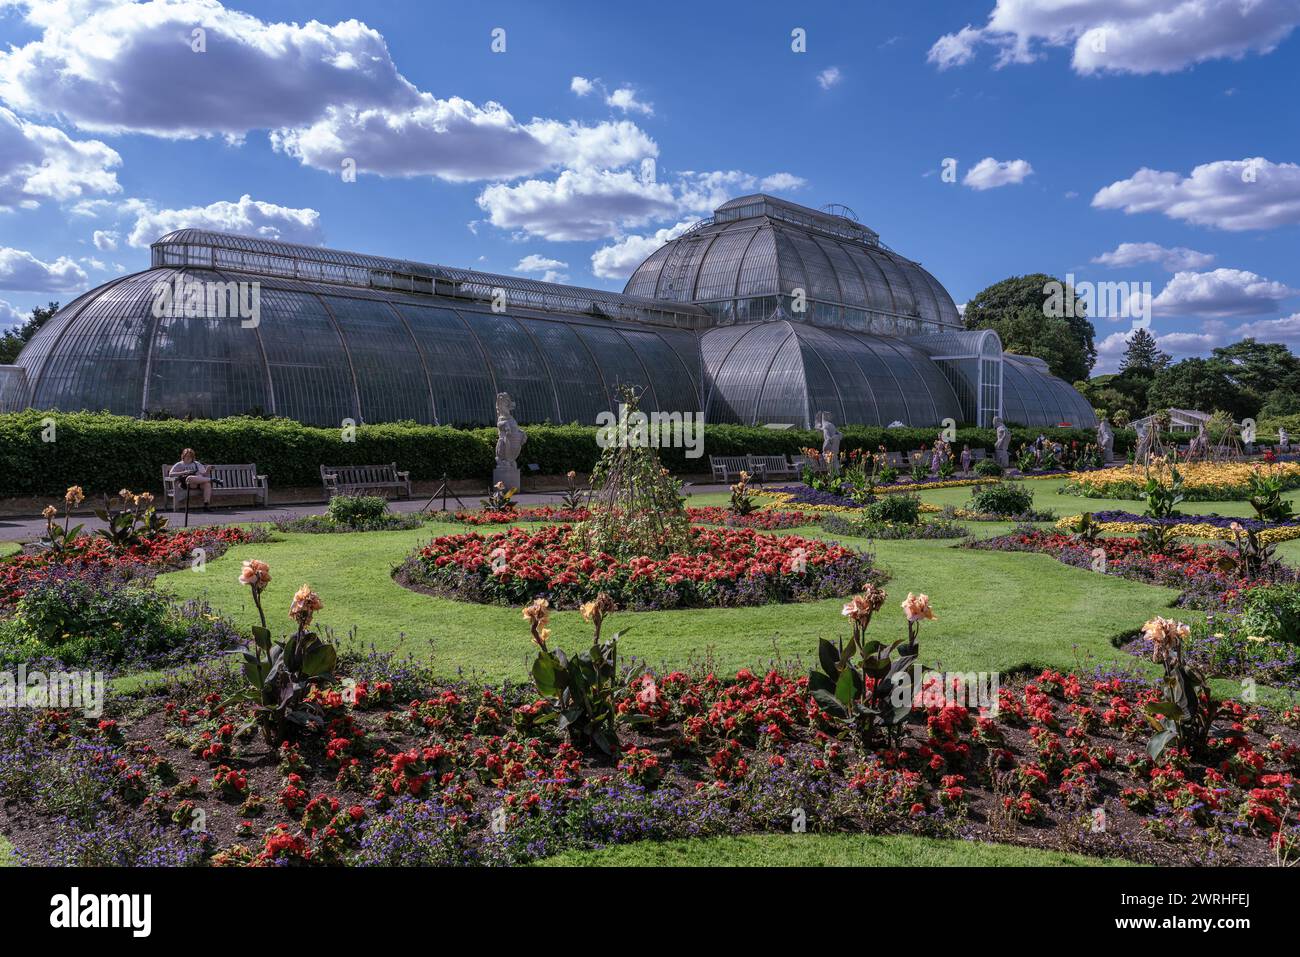 This is the Temperate House in Kew Gardens, a large greenhouse and famous landmark building in the Royal Botanic Gardens of RIchmond on August 08, 202 Stock Photo